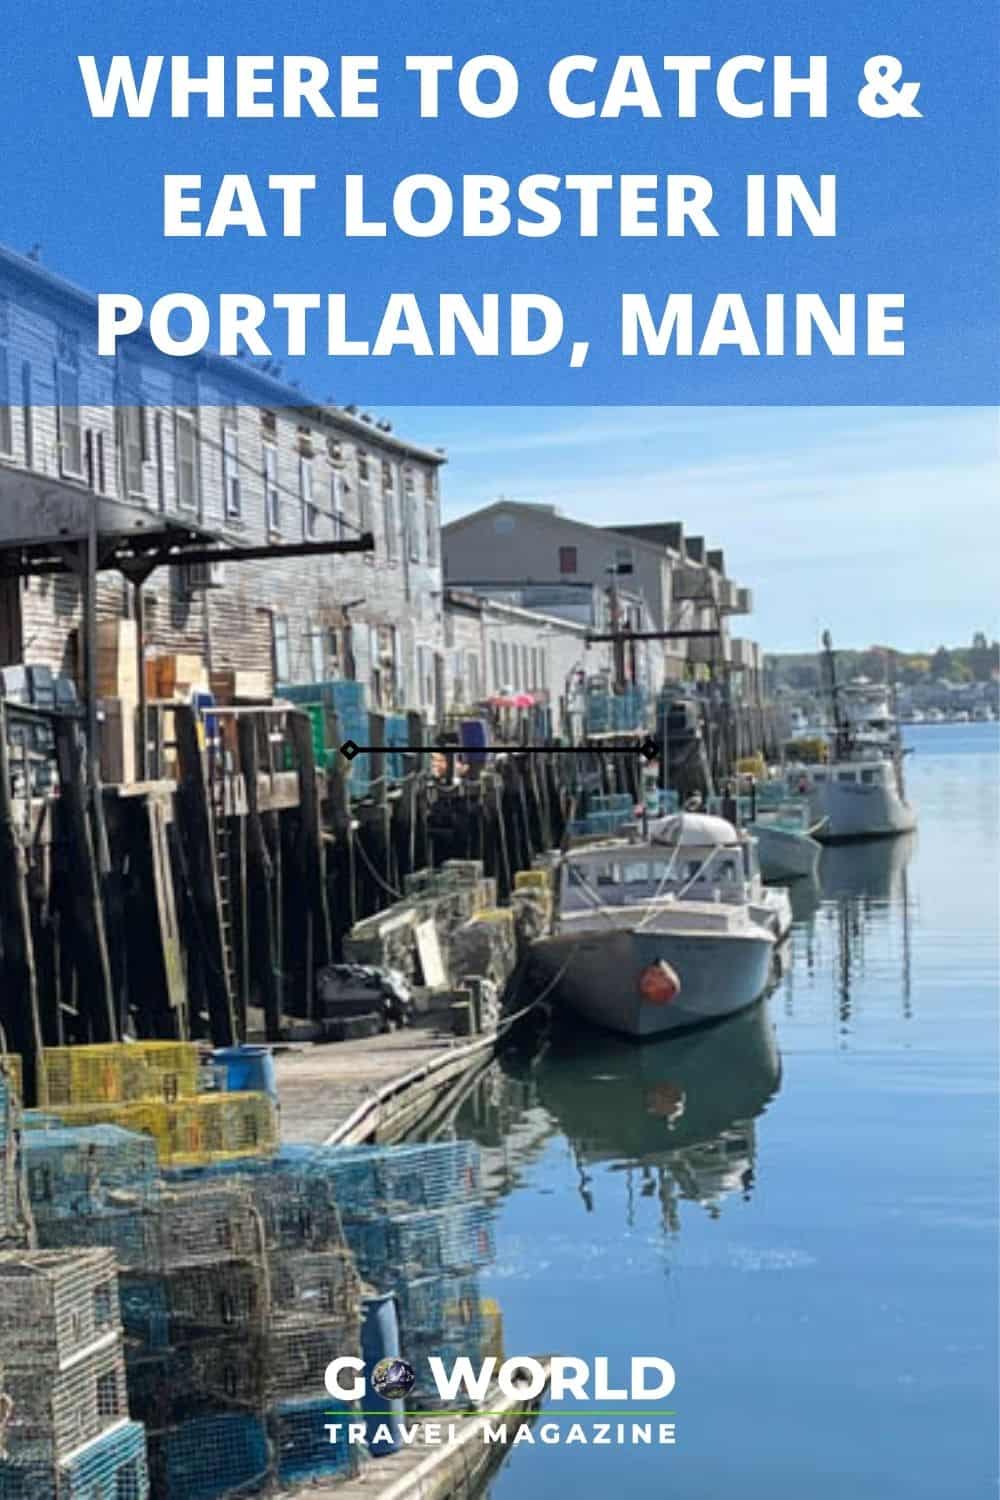 Eating lobster in Portland, Maine is a definite must but don't miss the craft beer, potato donuts and iconic lighthouses in this coastal town. #portlandmaine #mainelobster